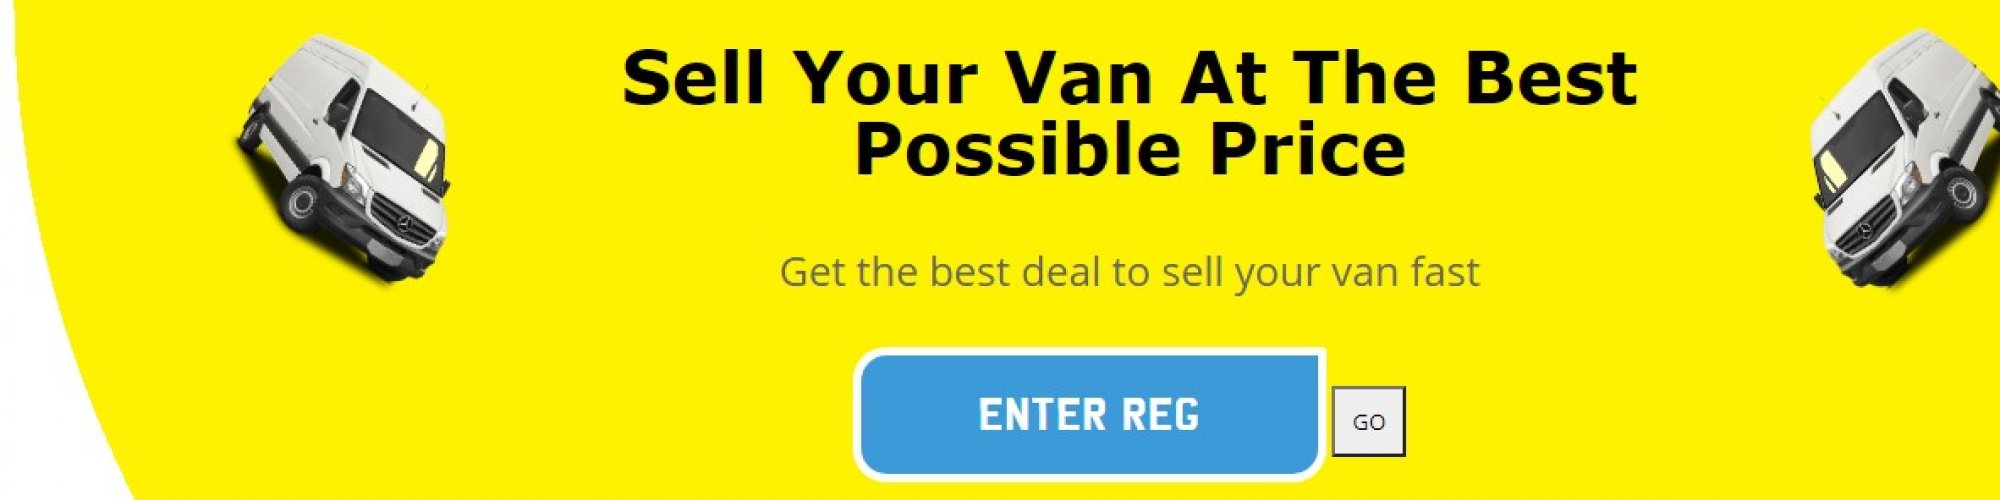 sell your van